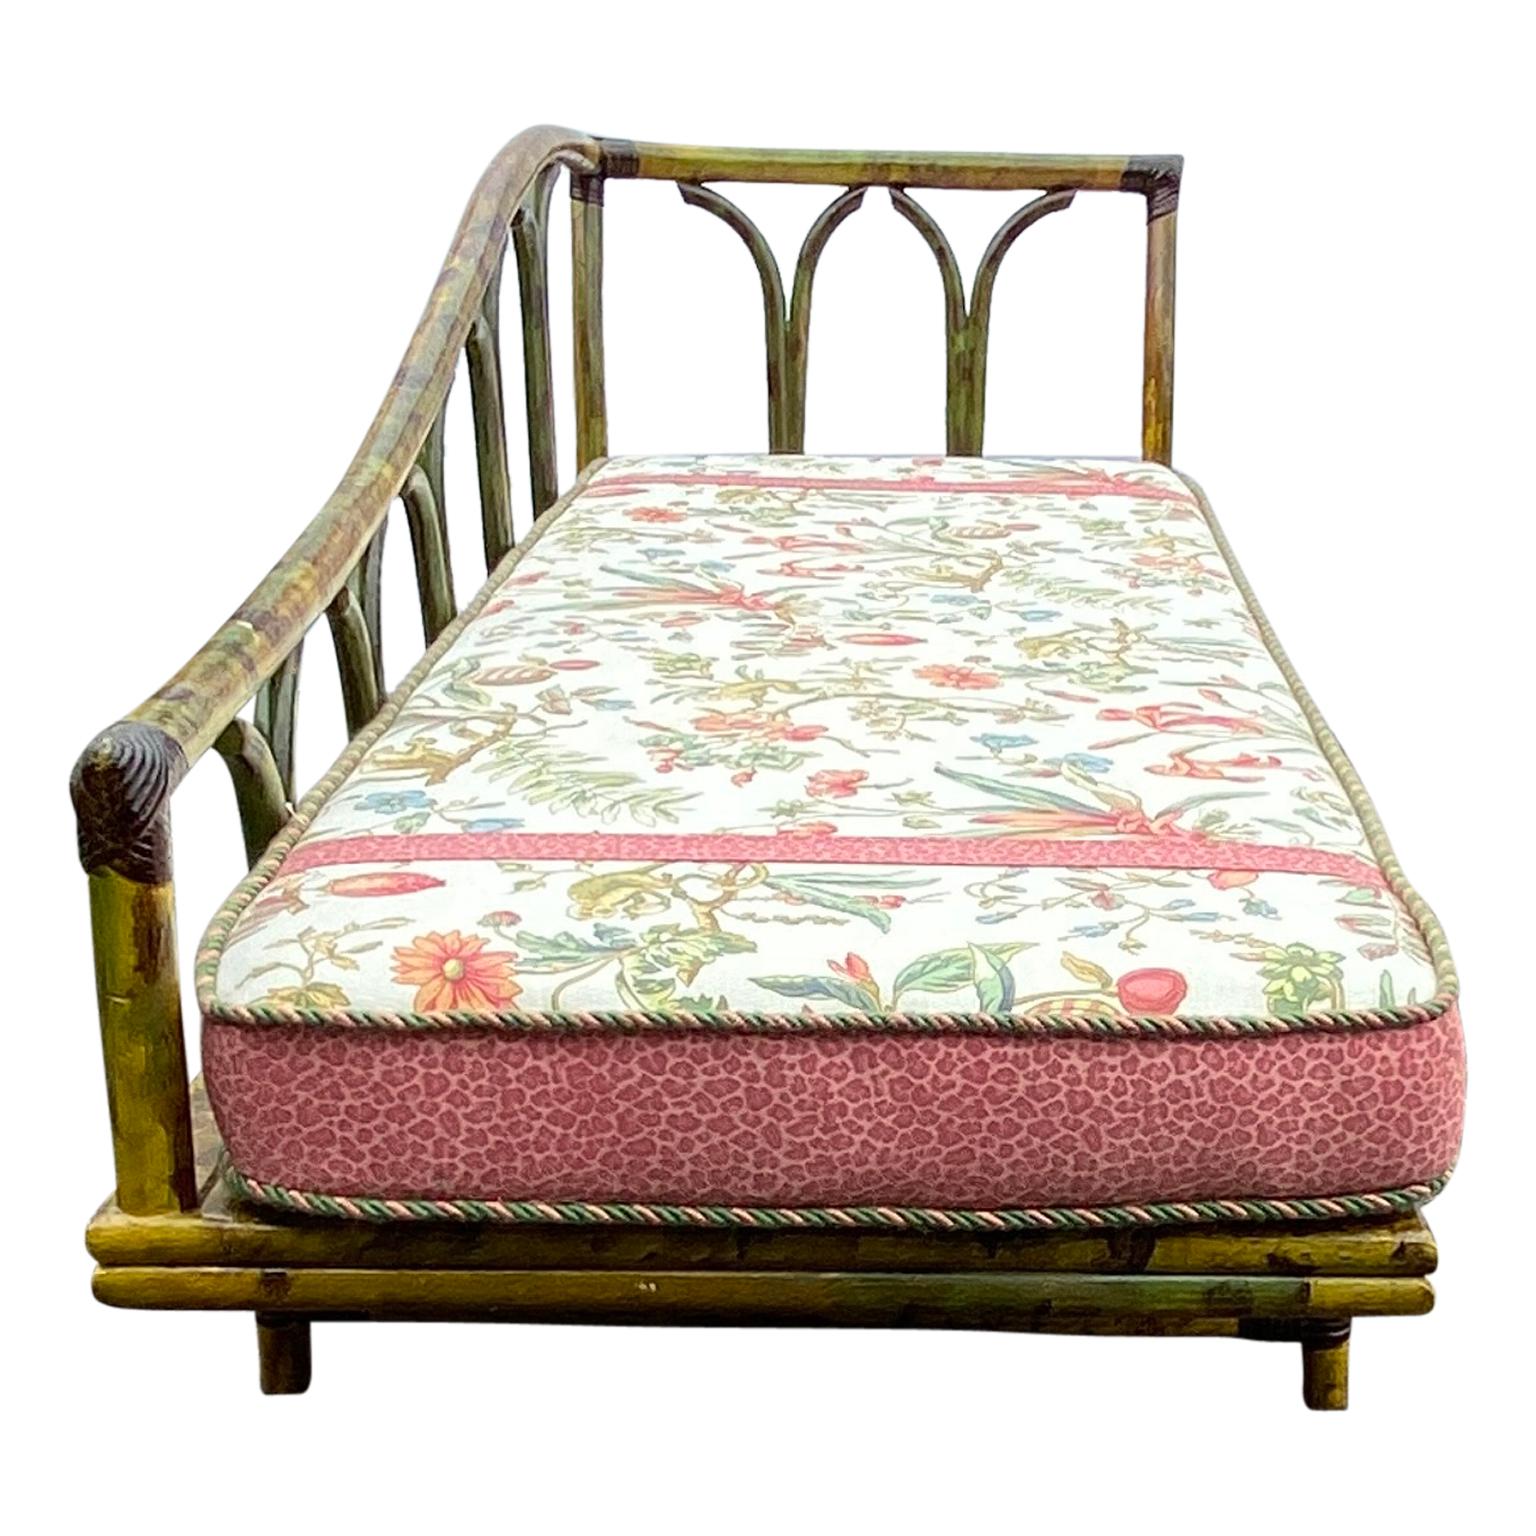 Woven Ficks Reed Rattan Daybed Chaise Lounge, Mid-Century Modern